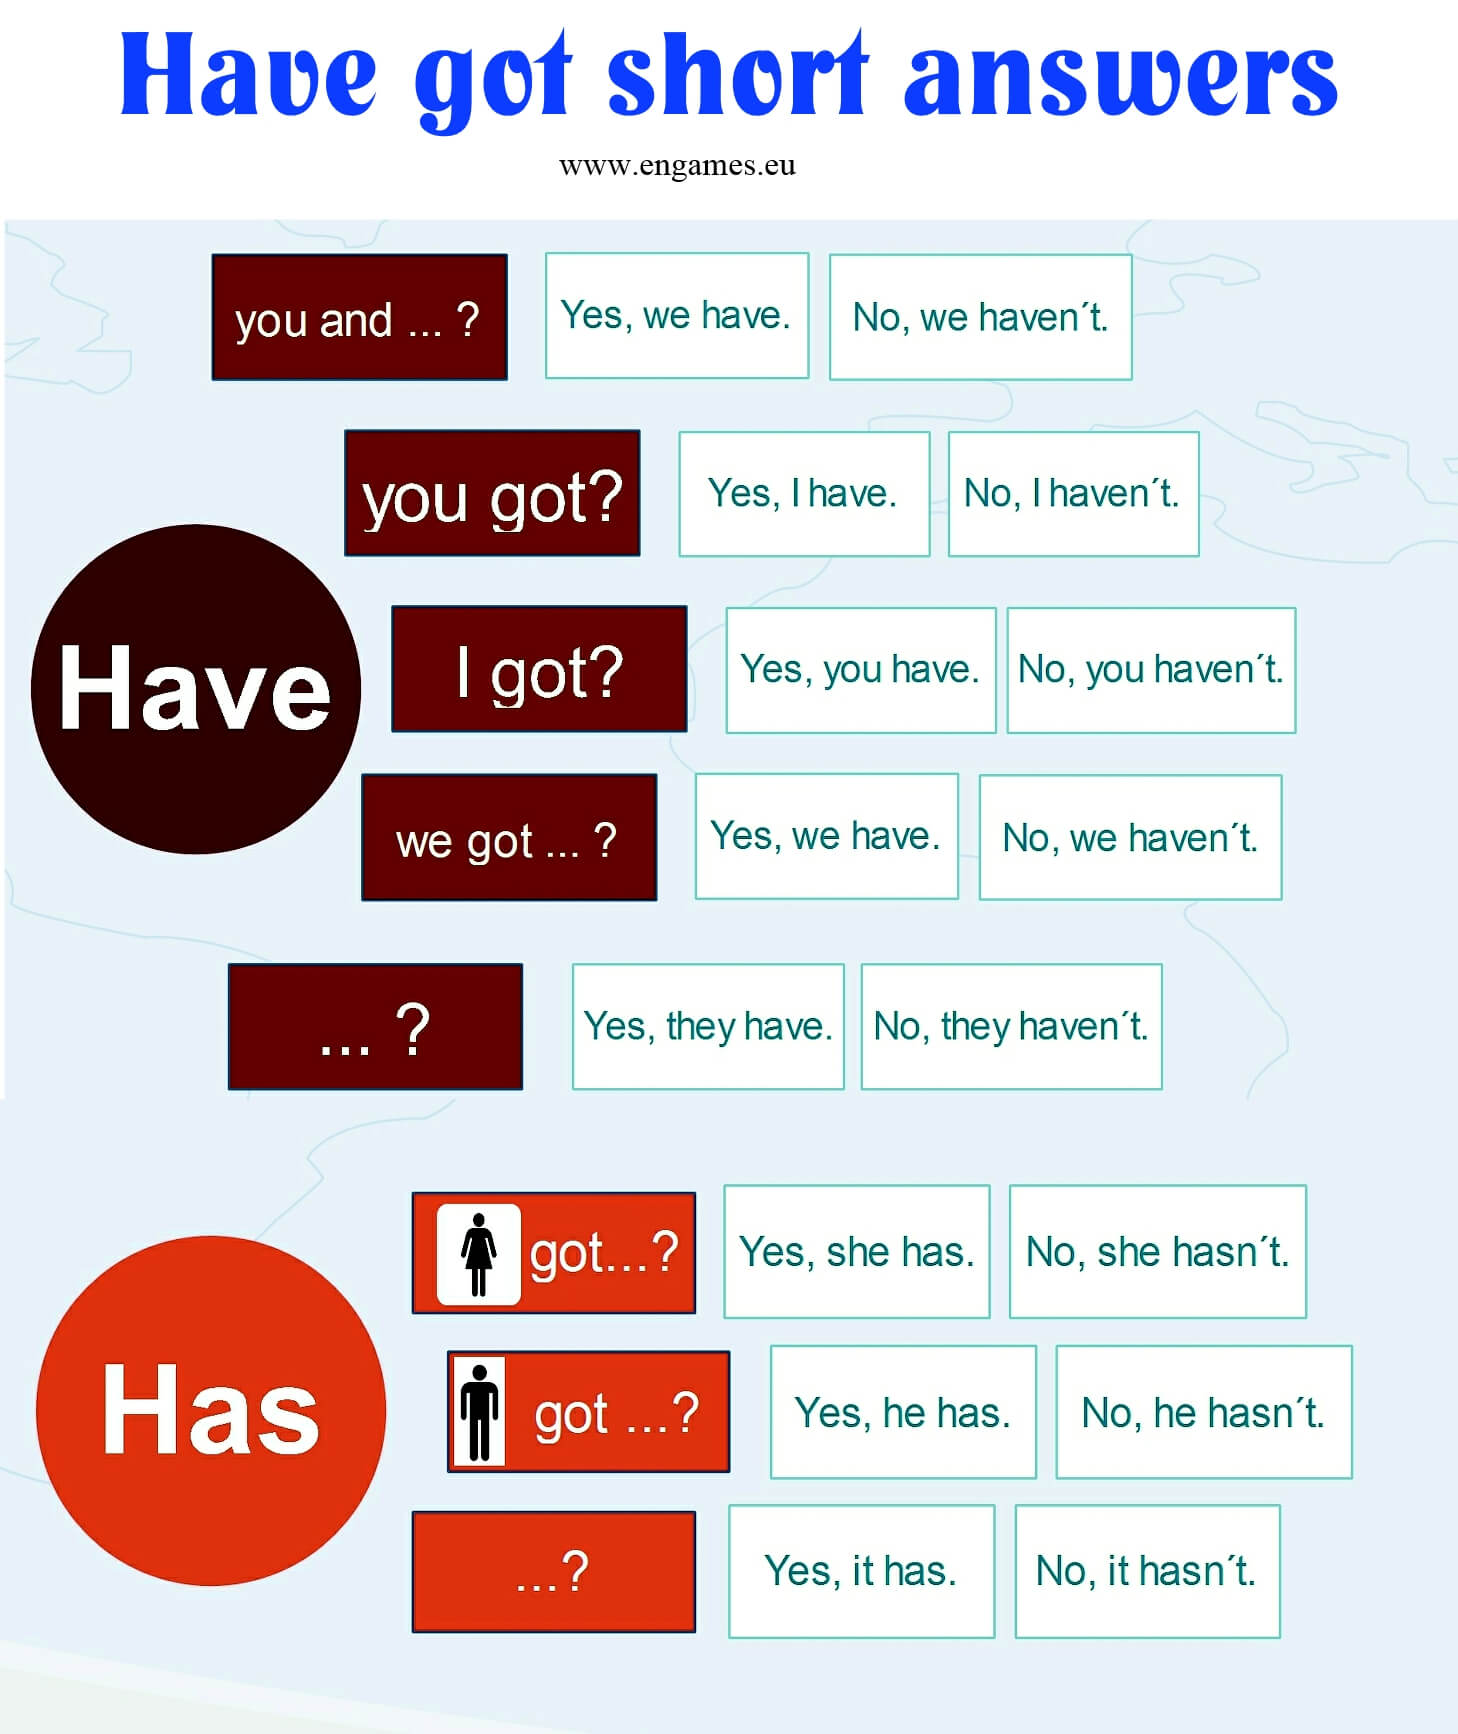 Have got short answers infographic web